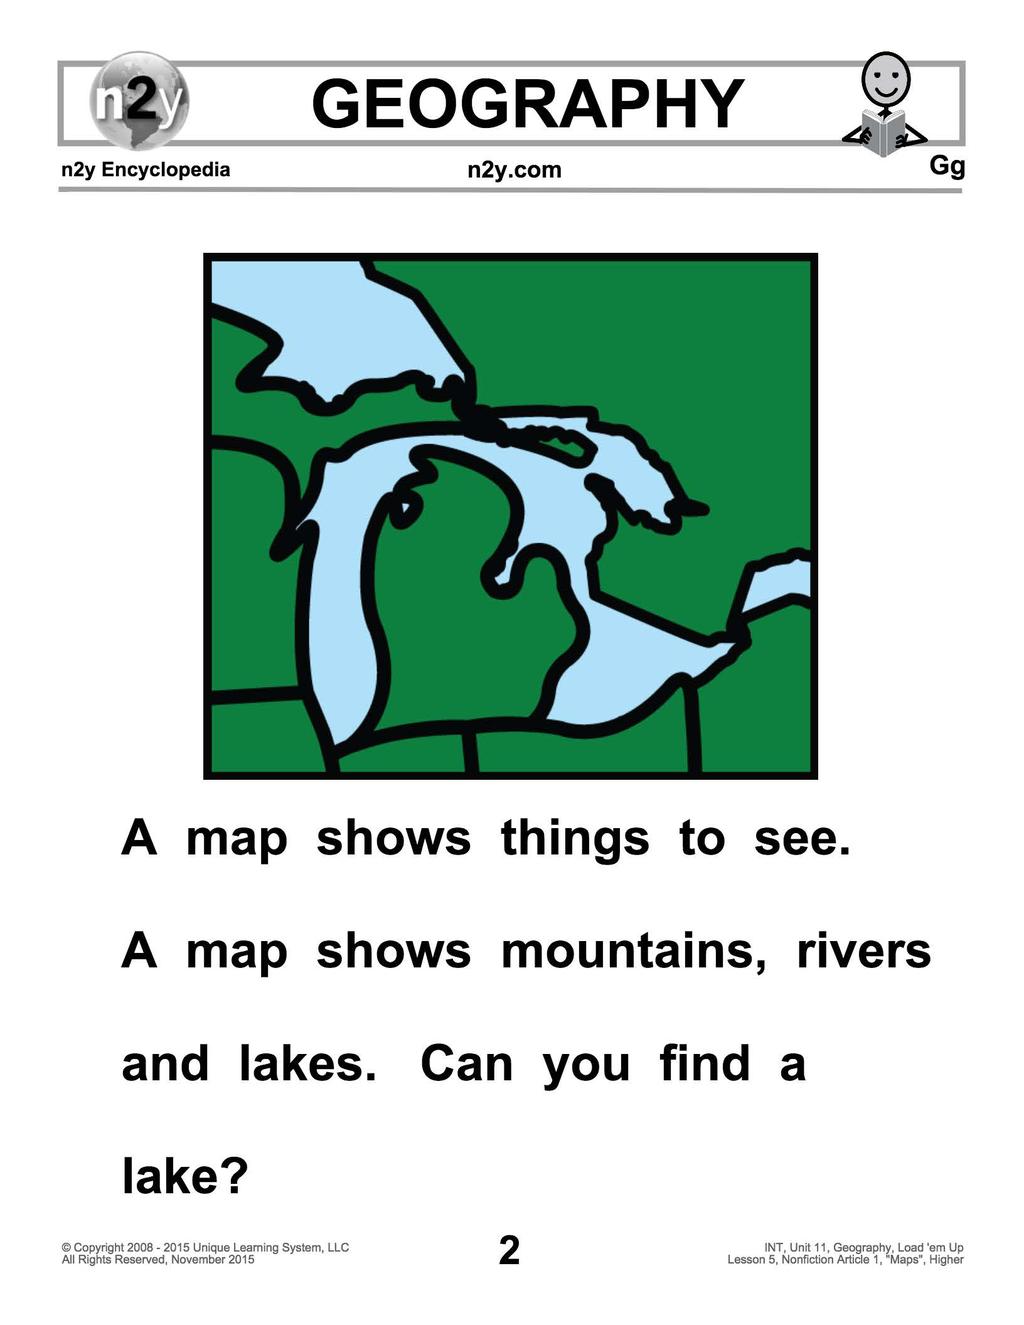 A map shows things to see. A map shows mountains, rivers and lakes.